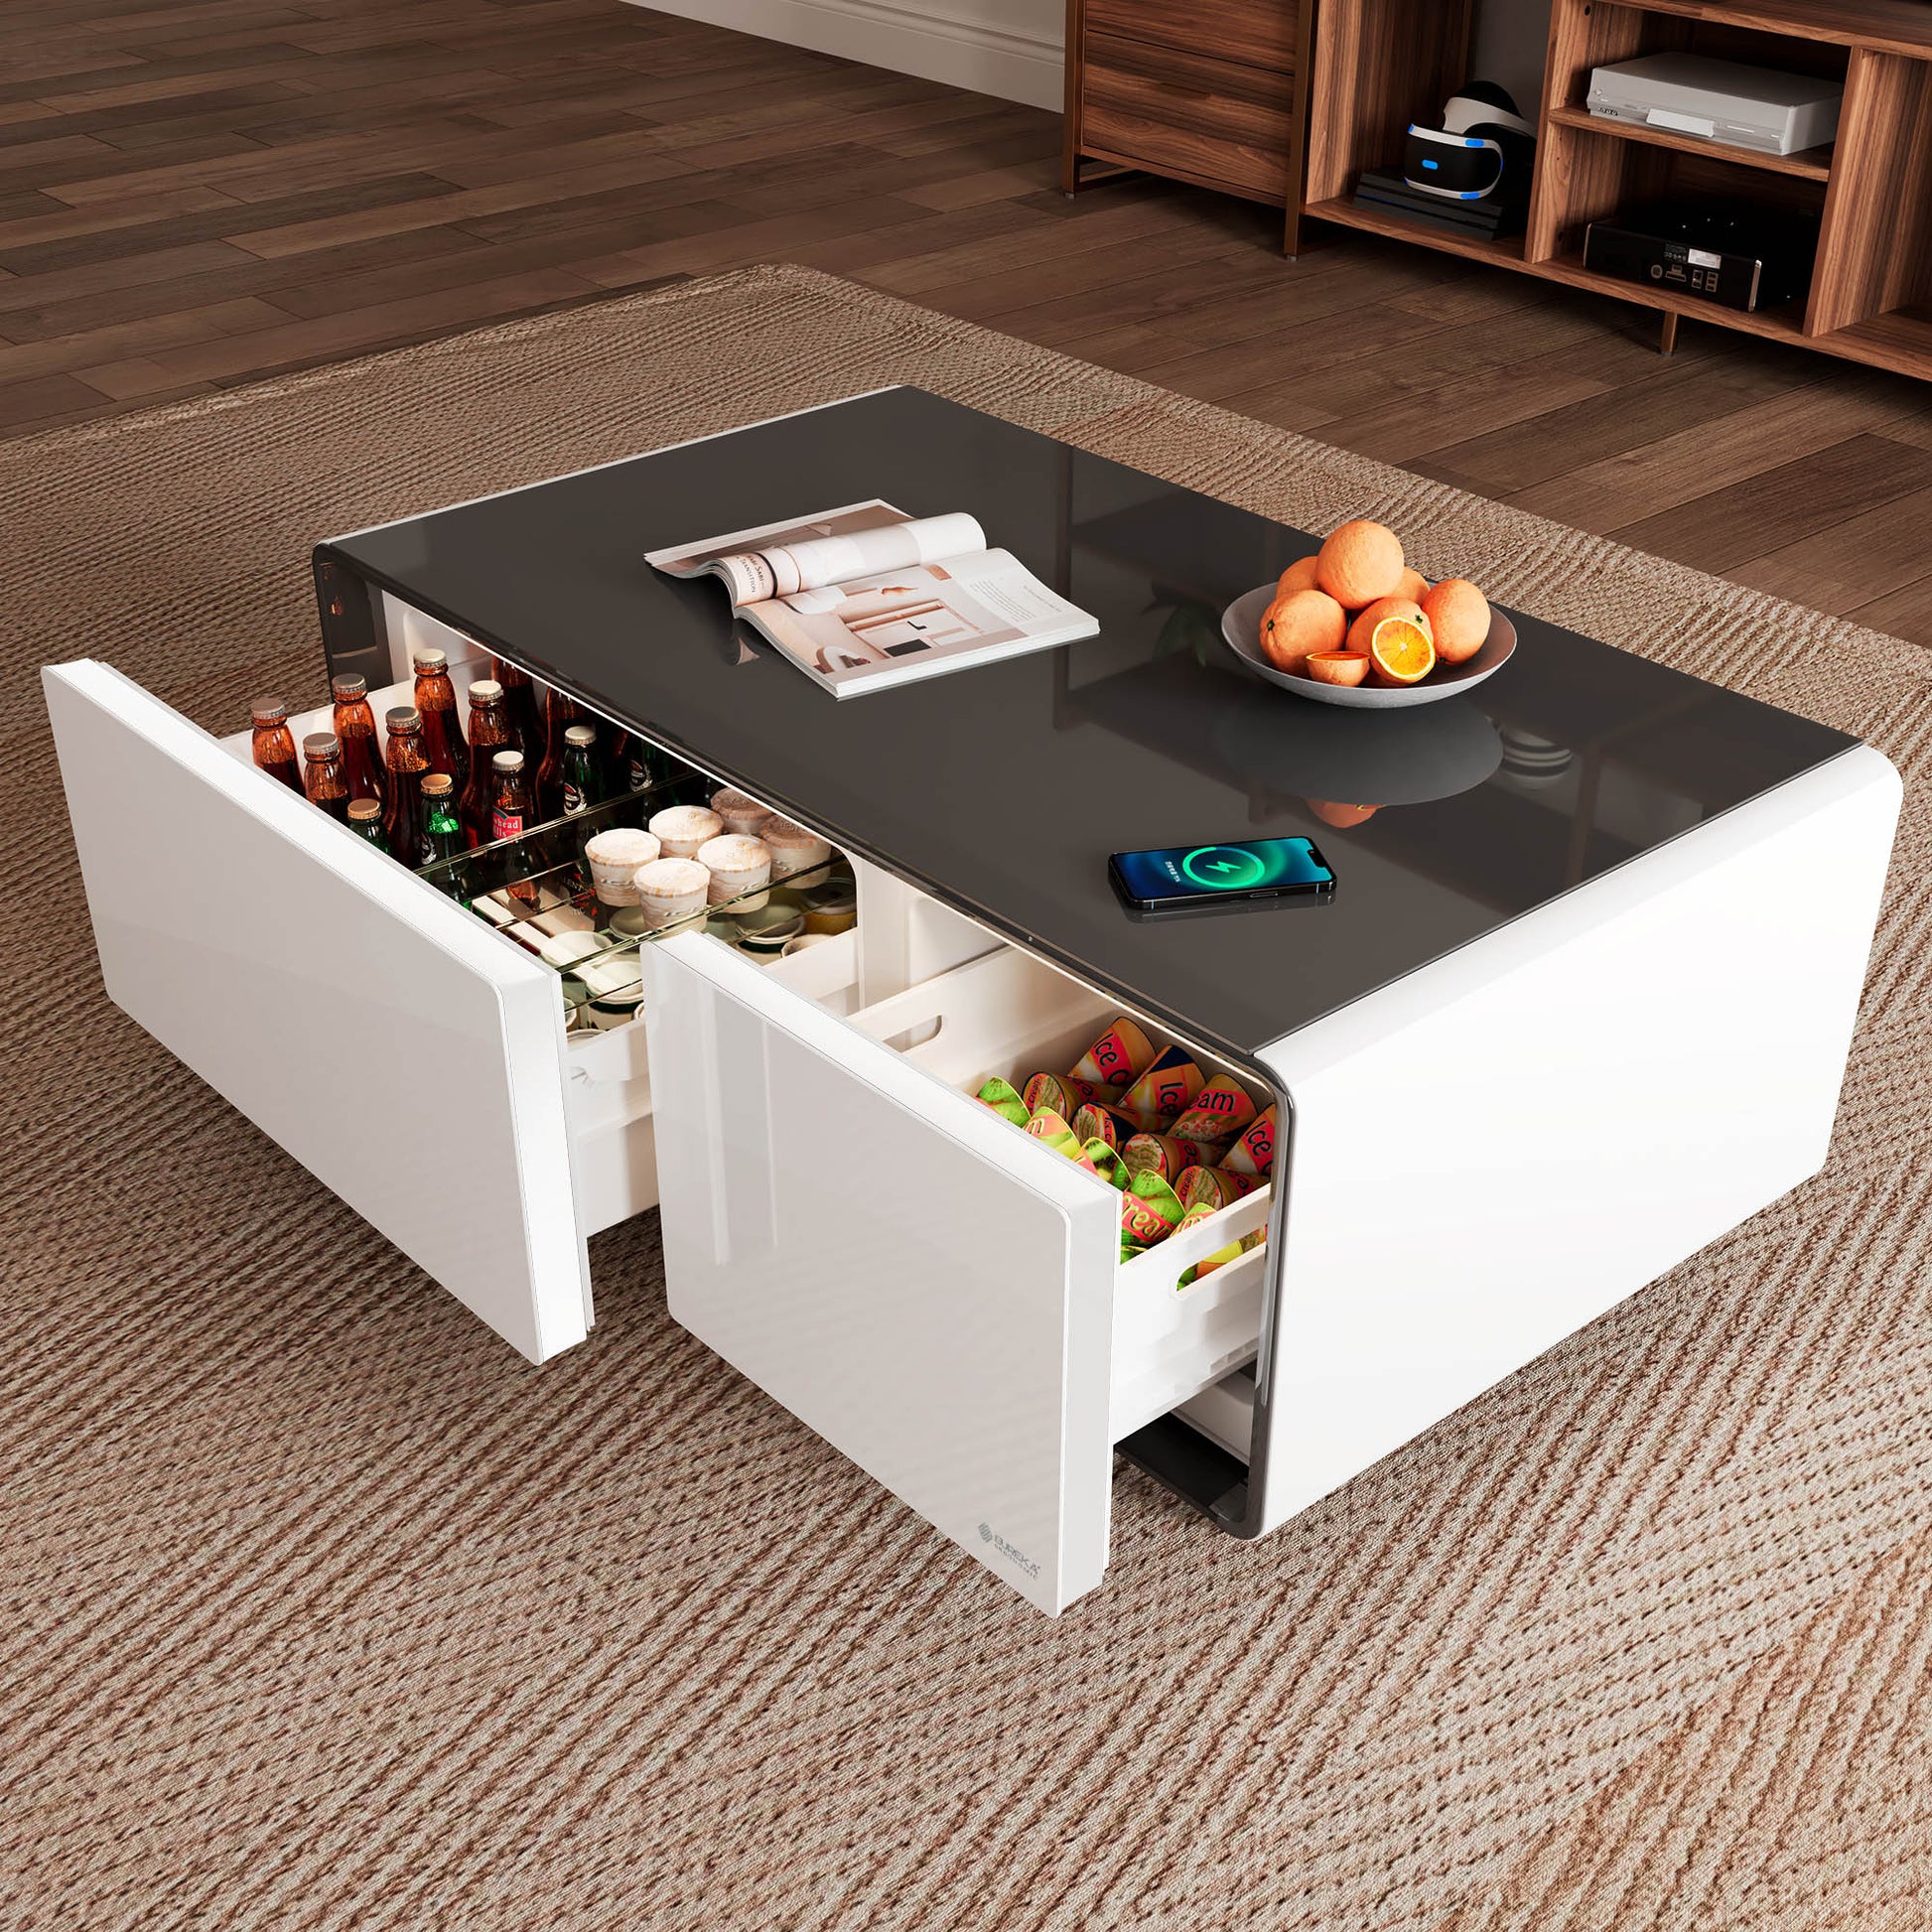 41 inch White Smart Fridge Coffee Table with Bluetooth Speakers with Glass Top, Fit all your drinks and snacks